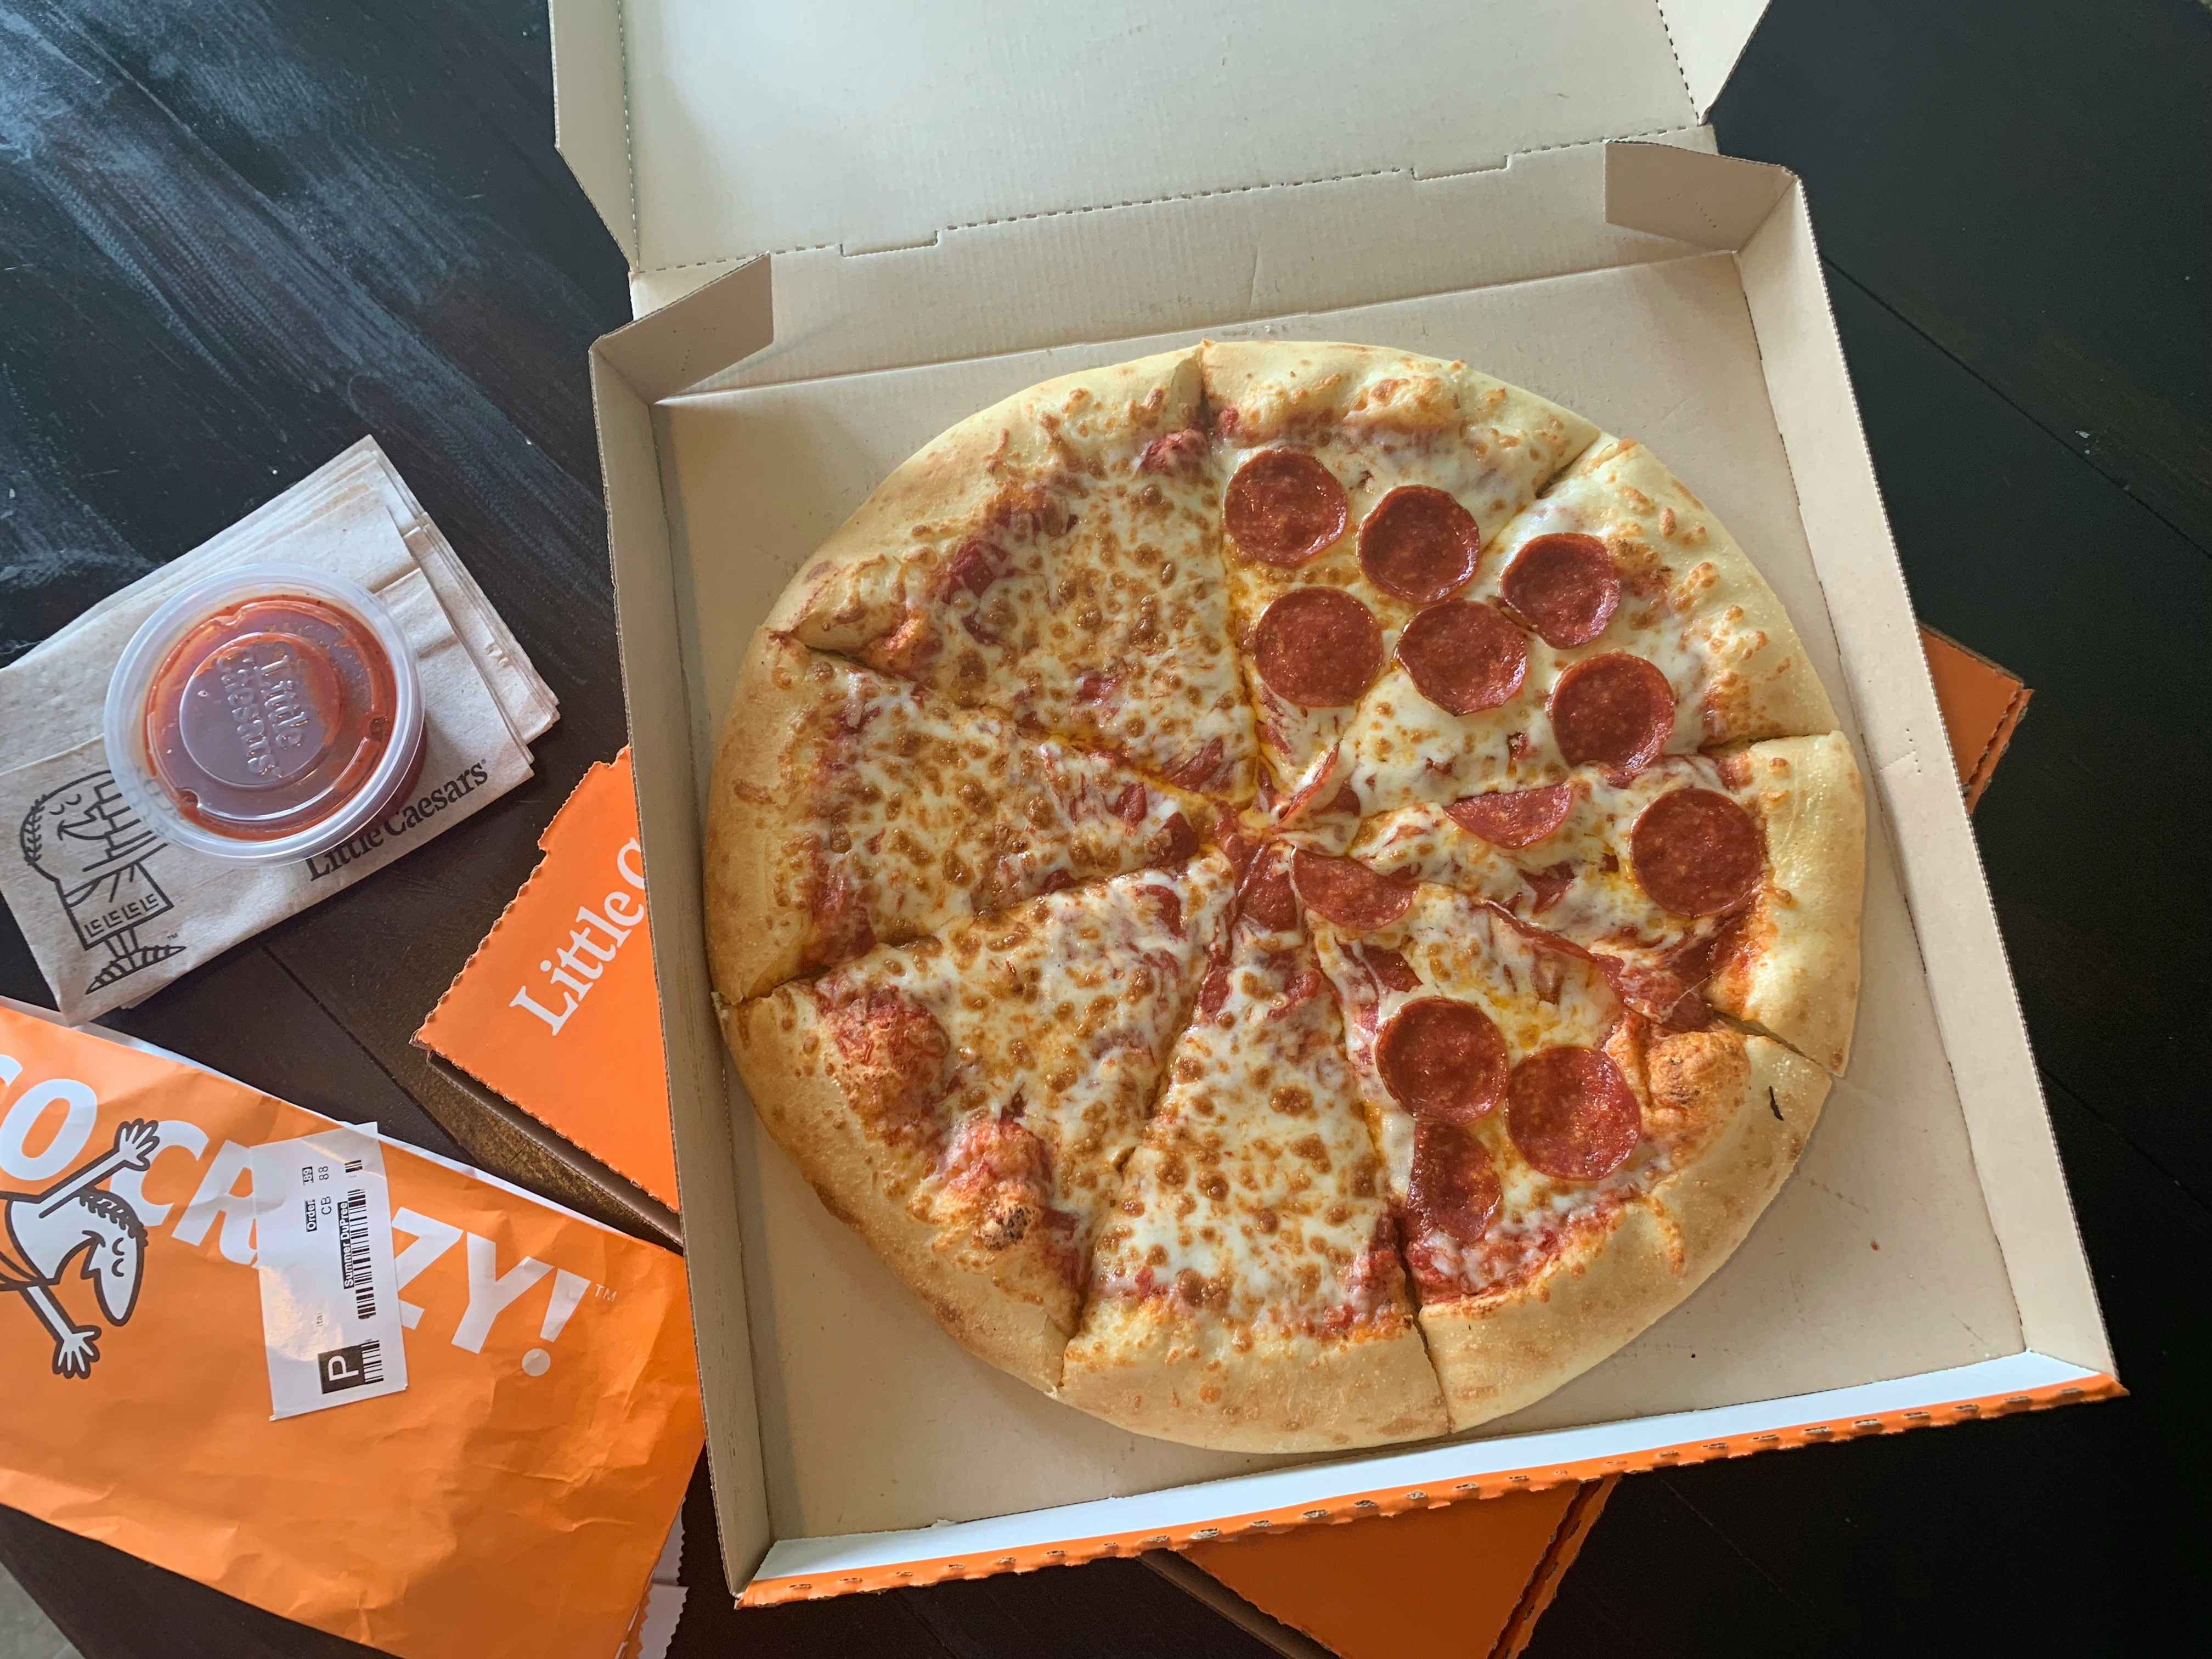 half cheese half pepperoni pizza from Little Caesar's